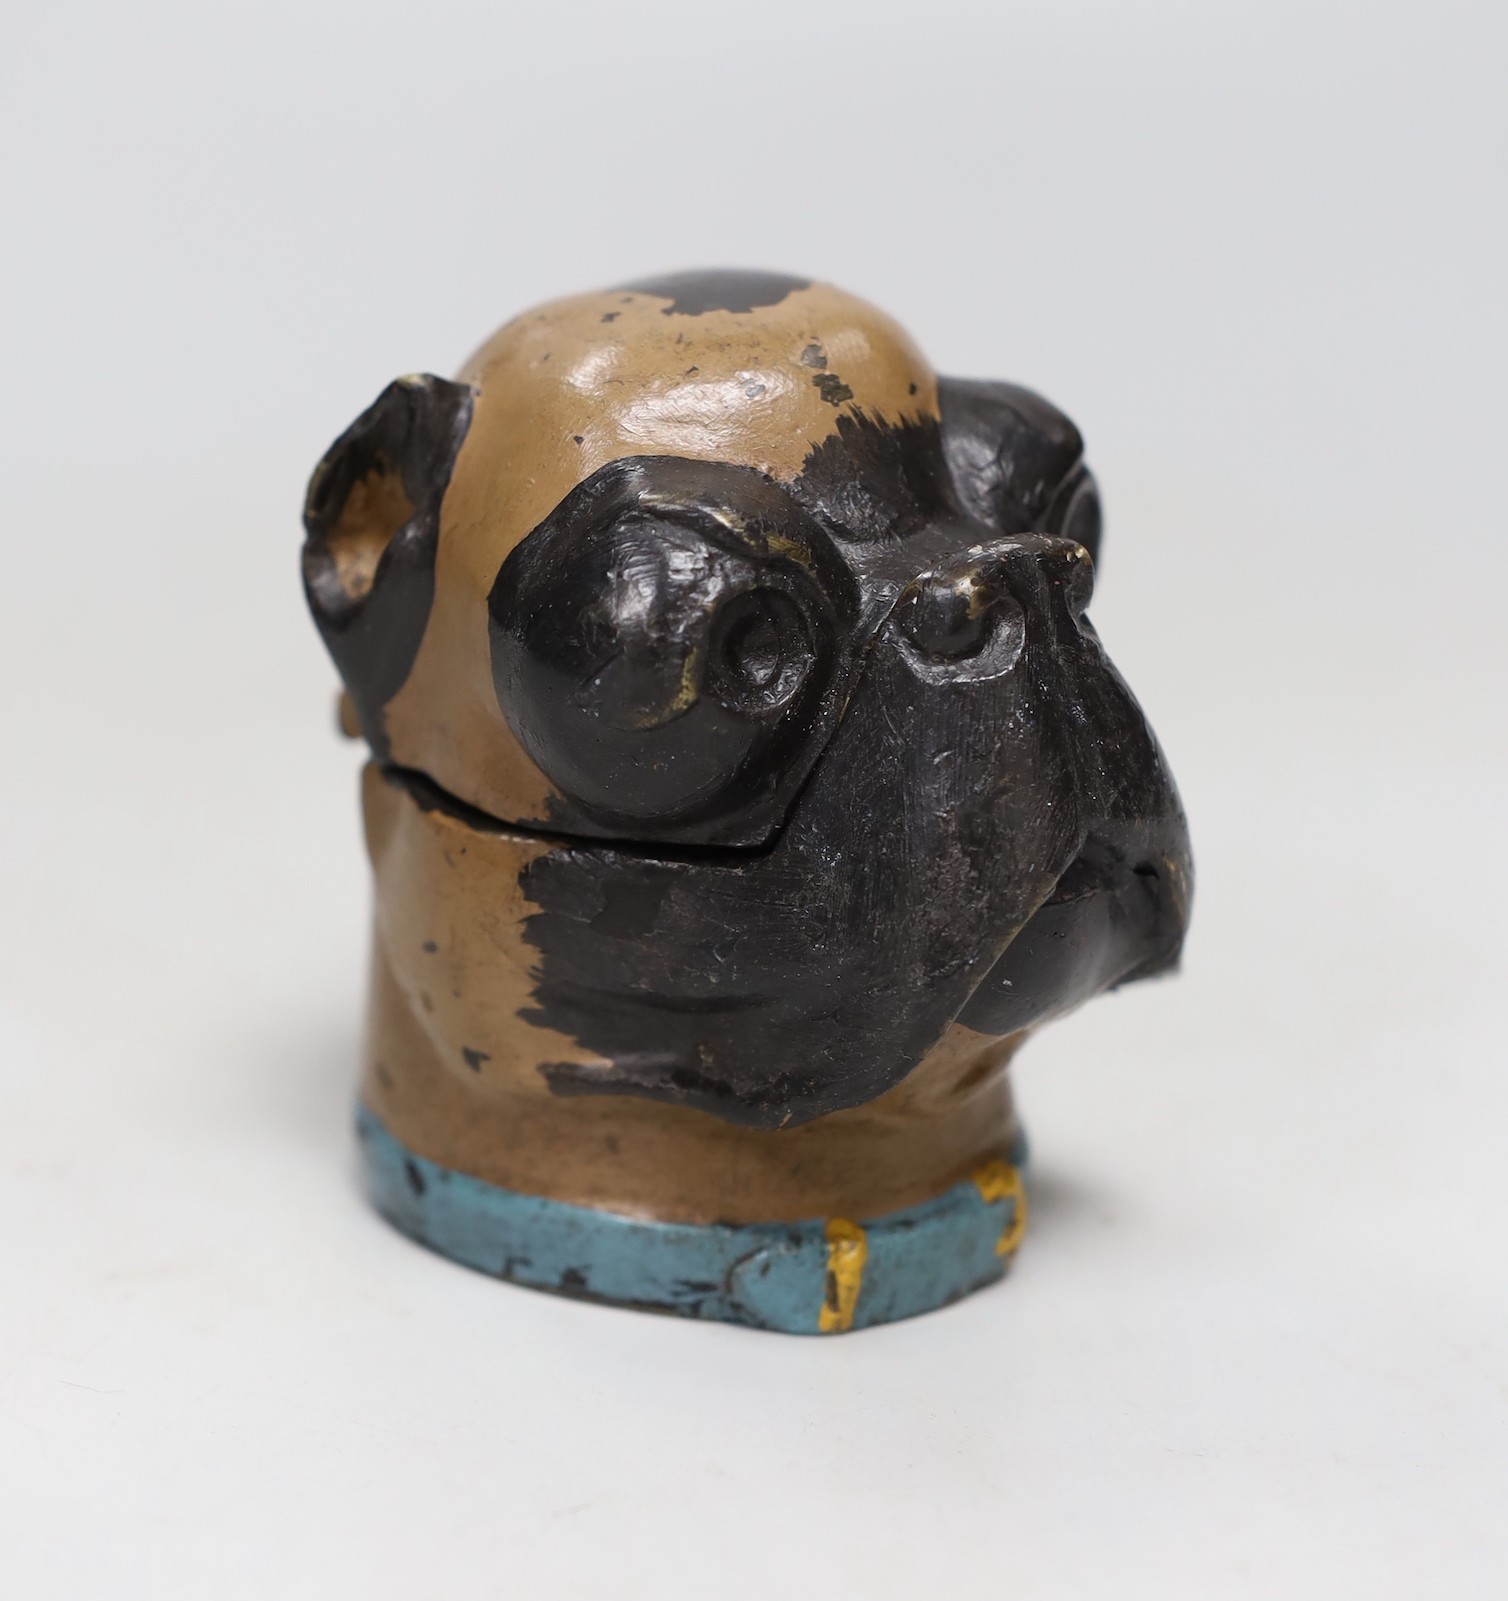 A painted cast metal bulldog inkwell, 9.5                                                                                                                                                                                   